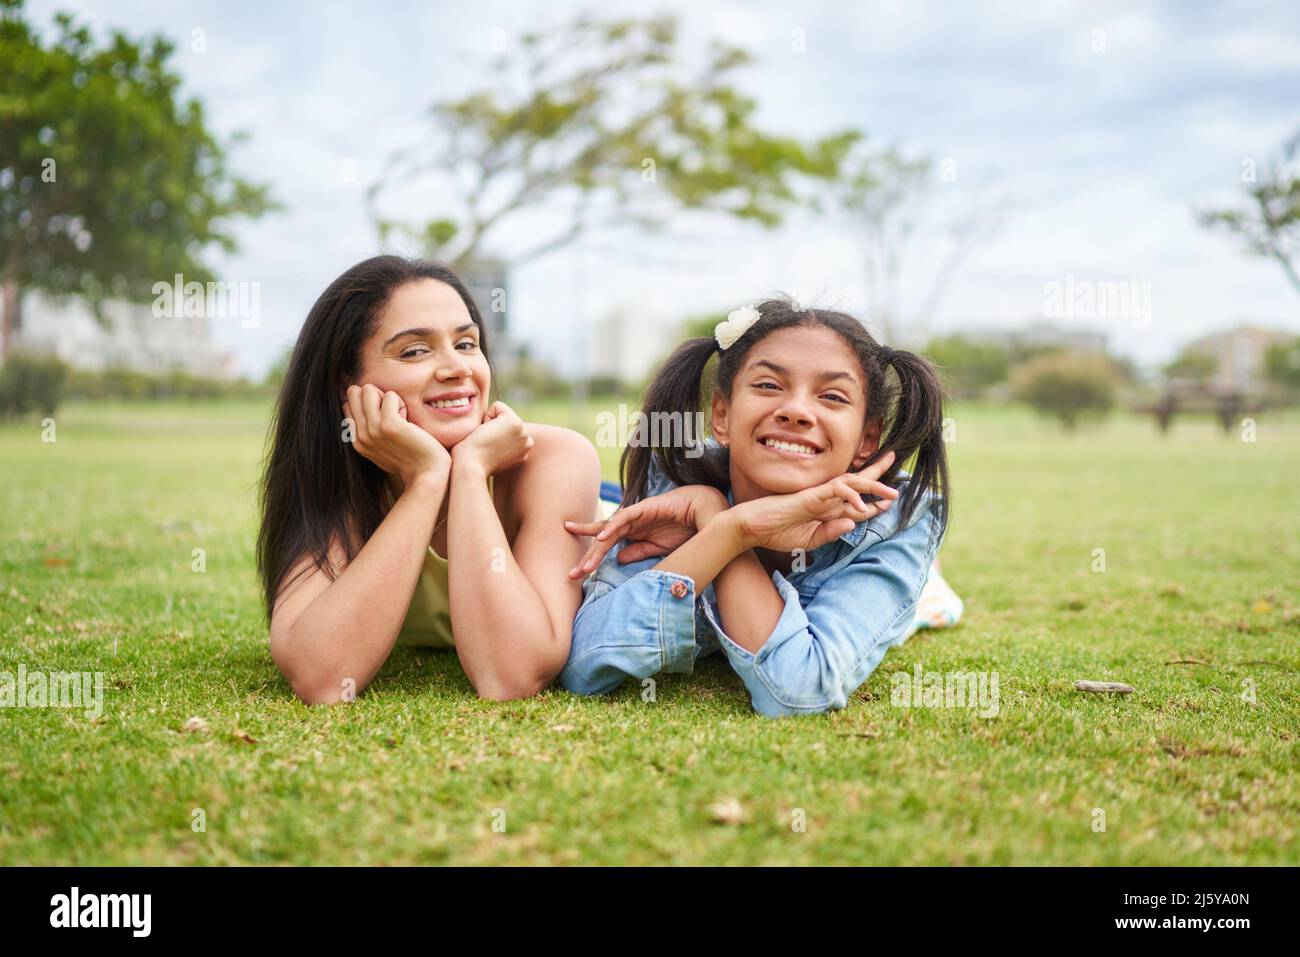 Portrait happy brunette mother and daughter laying in park grass Stock Photo